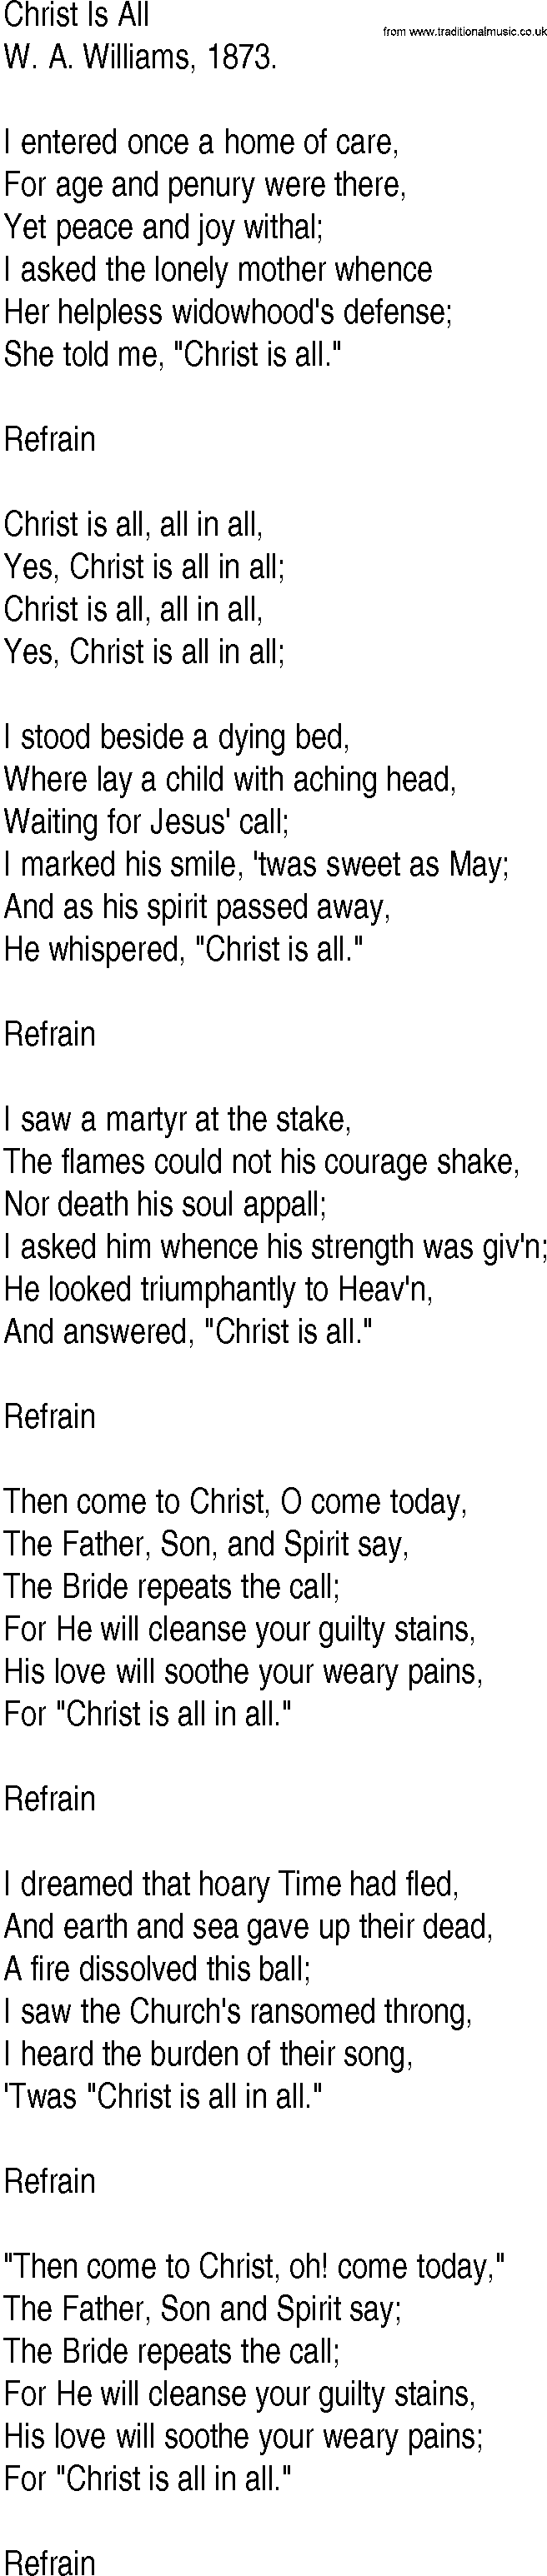 Hymn and Gospel Song: Christ Is All by W A Williams lyrics